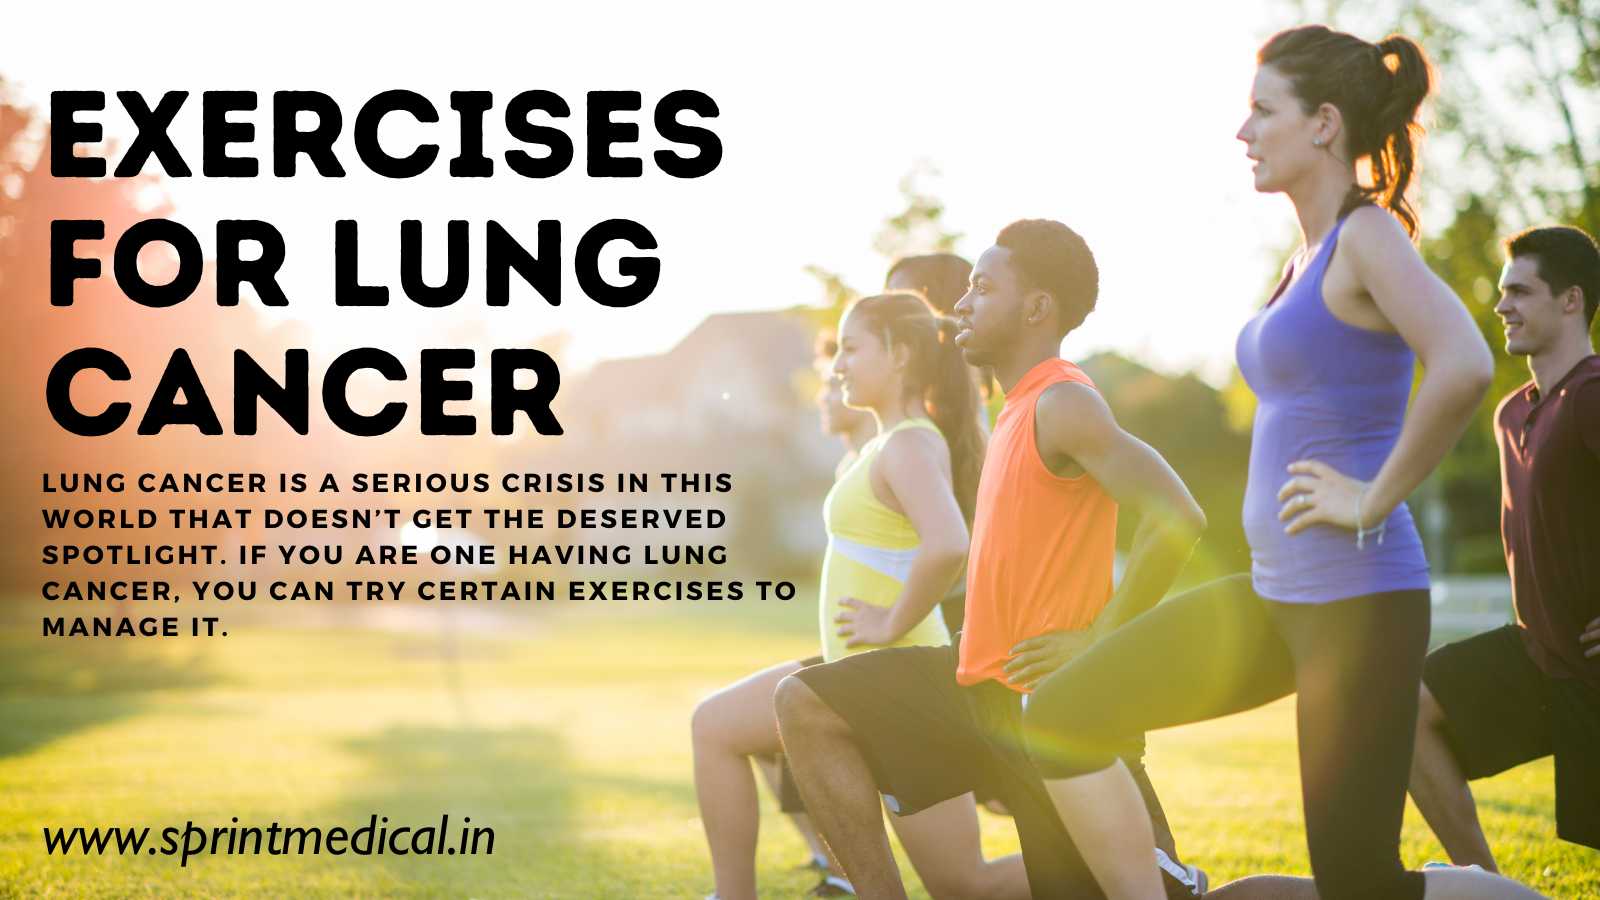 Exercises for Lung Cancer